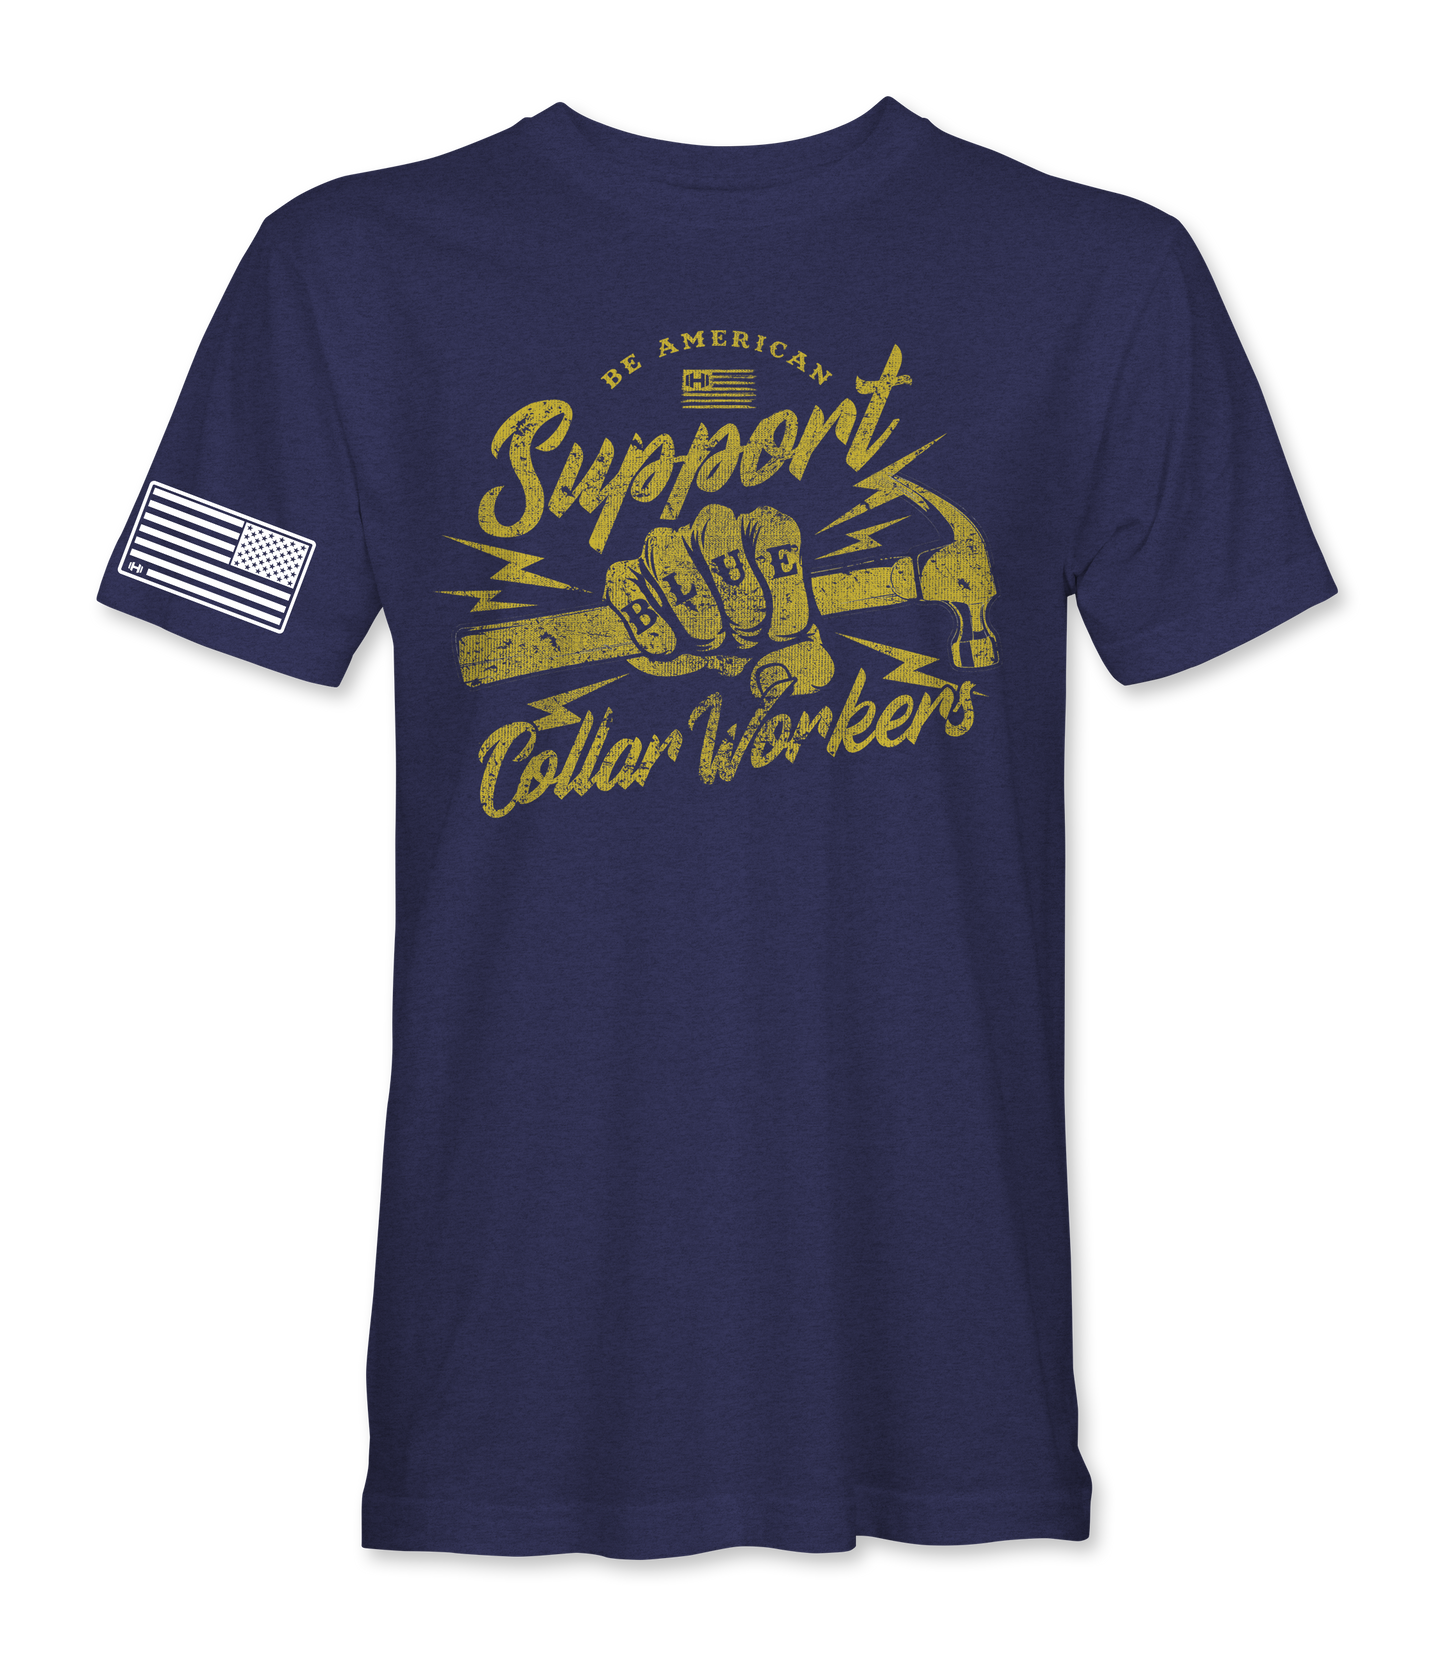 Blue Collar Workers T-Shirt